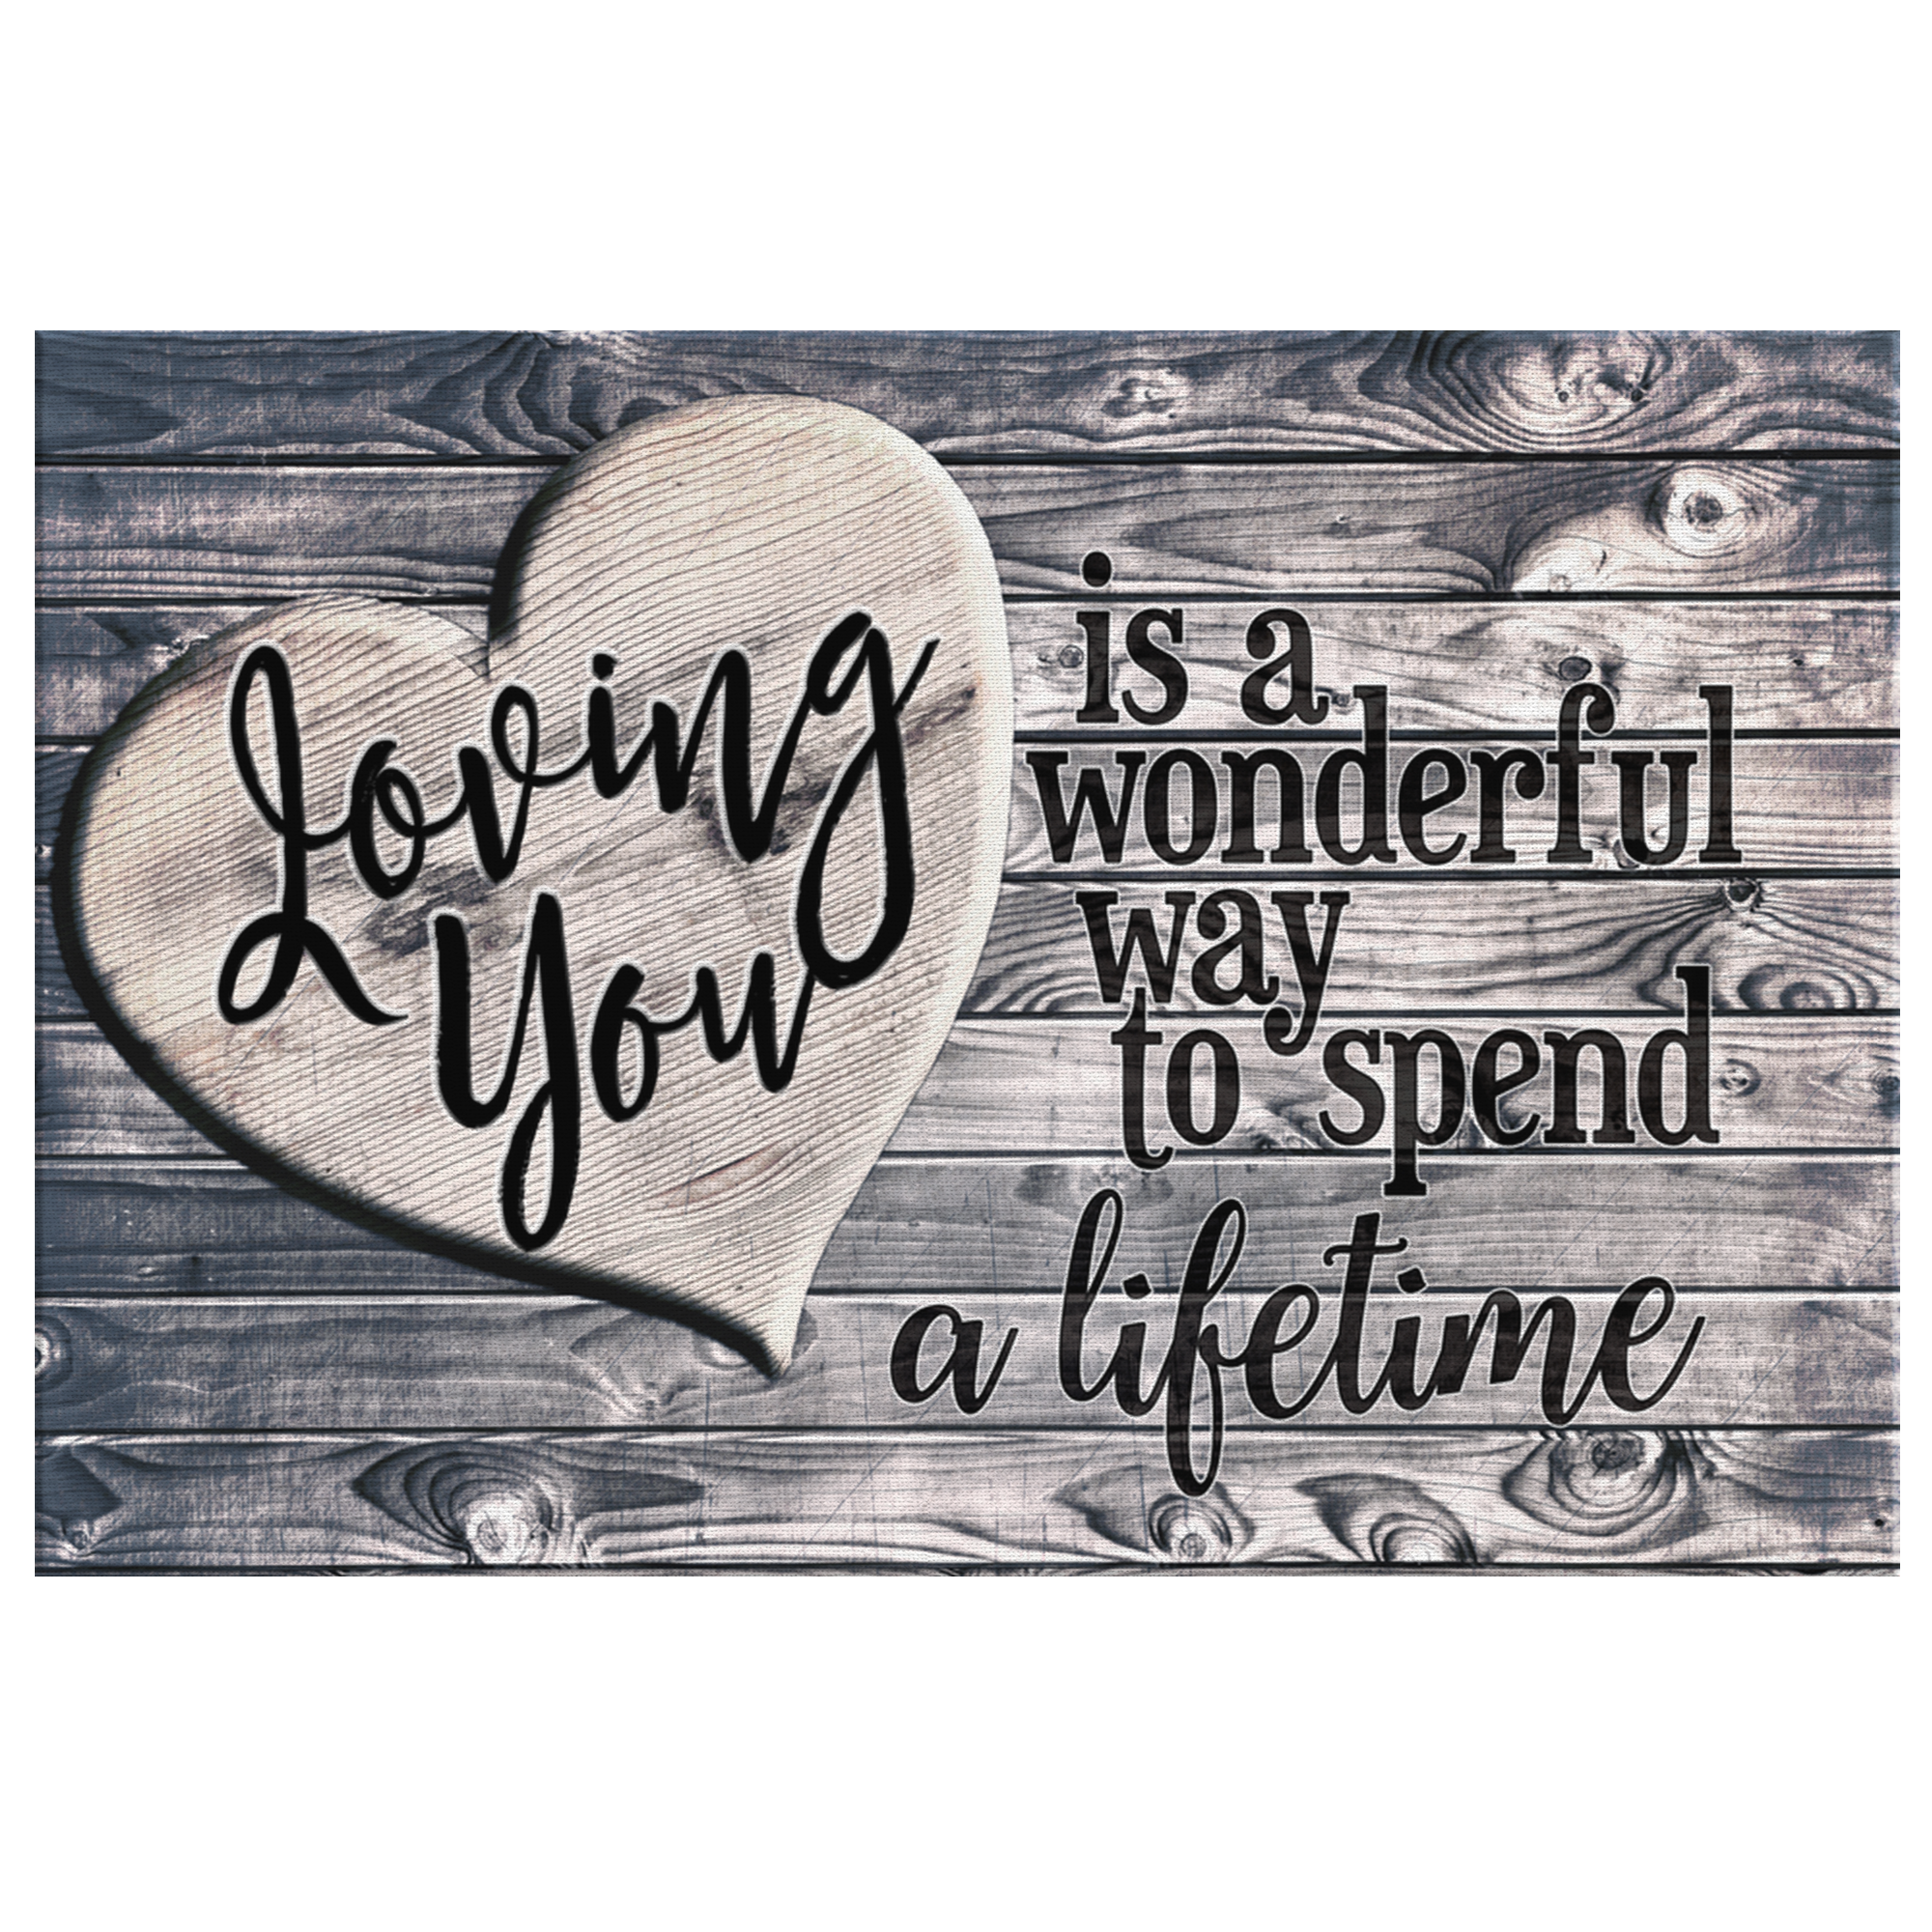 "Loving You - A Wonderful Way To Spend A Lifetime" Premium Canvas Wall Art